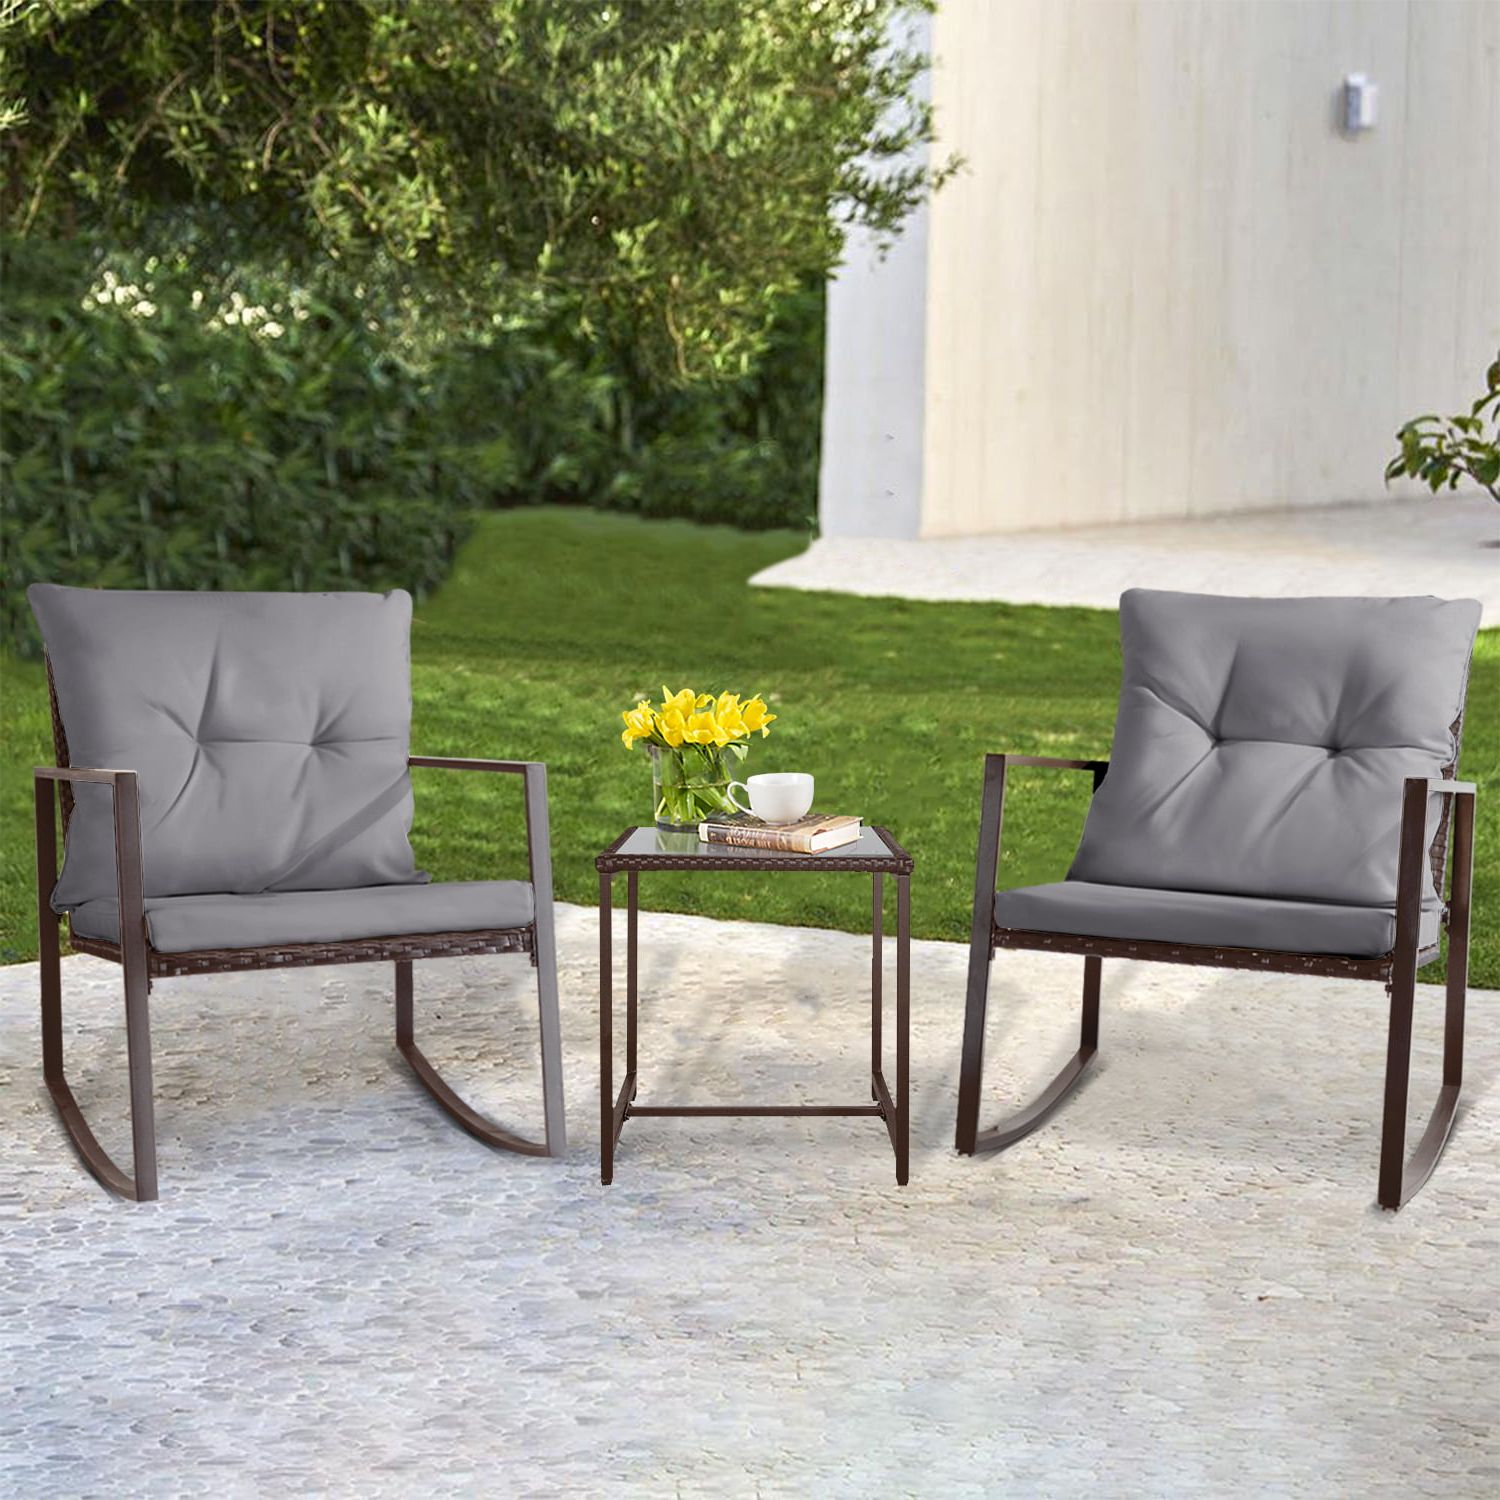 Suncrown Outdoor 3 Piece Rocking Bistro Set, Black Wicker Furniture Two  Chairs With Glass Coffee Table (light Blue Cushion) – Walmart With Recent 3 Piece Cushion Rocking Chair Set (Photo 7 of 15)